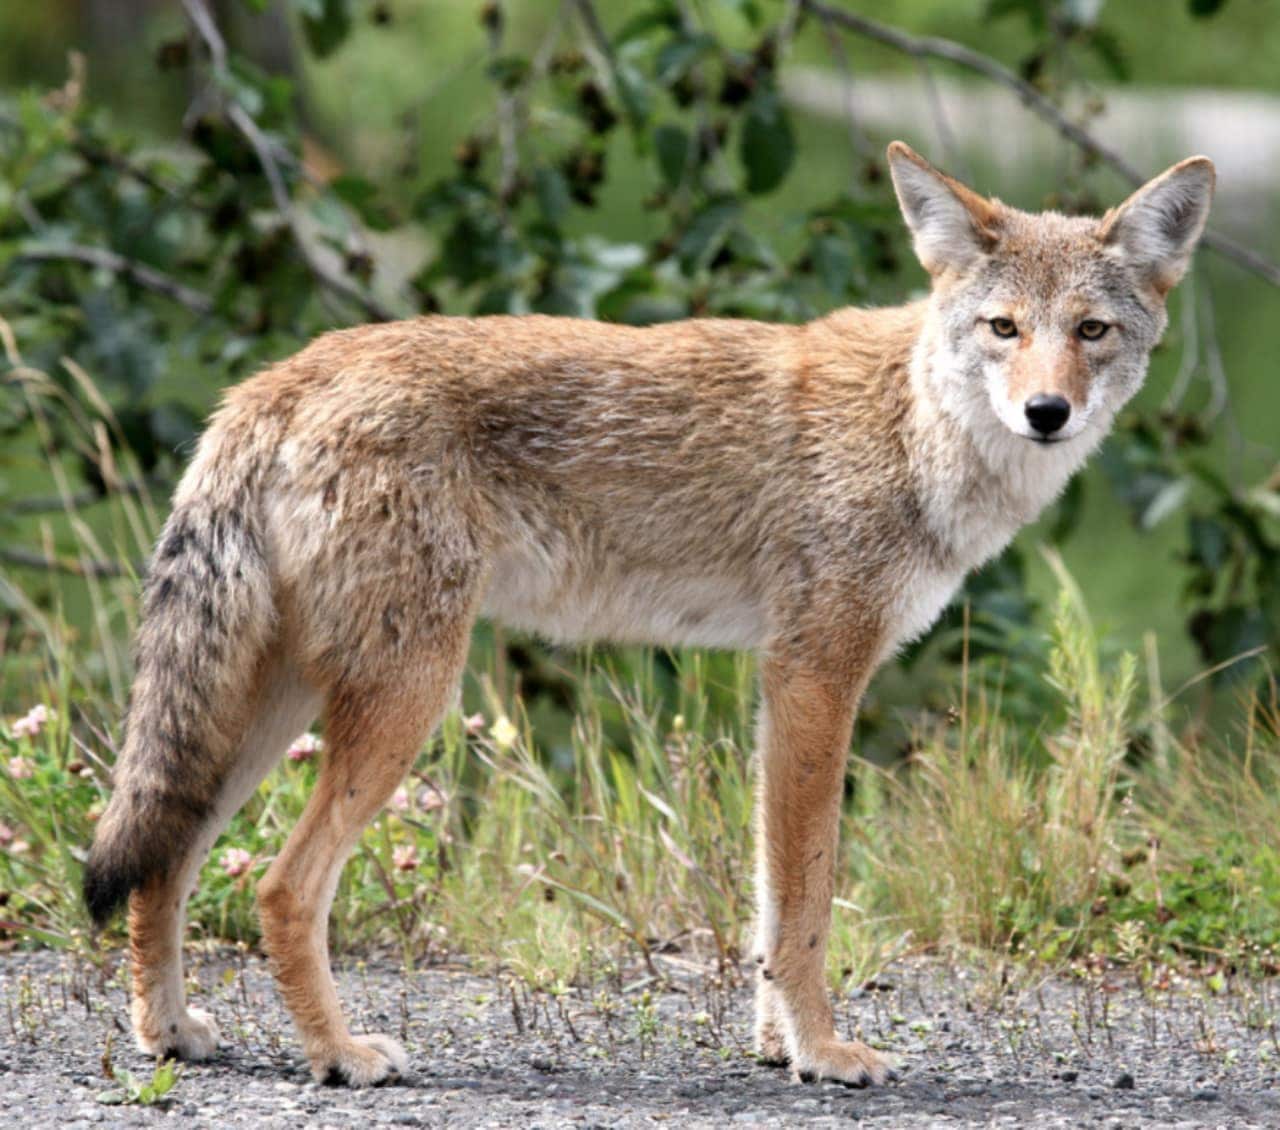 The Wilton Loop of the Norwalk River Valley Trail has been reopened following an encounter between a dog and a coyote Saturday afternoon.